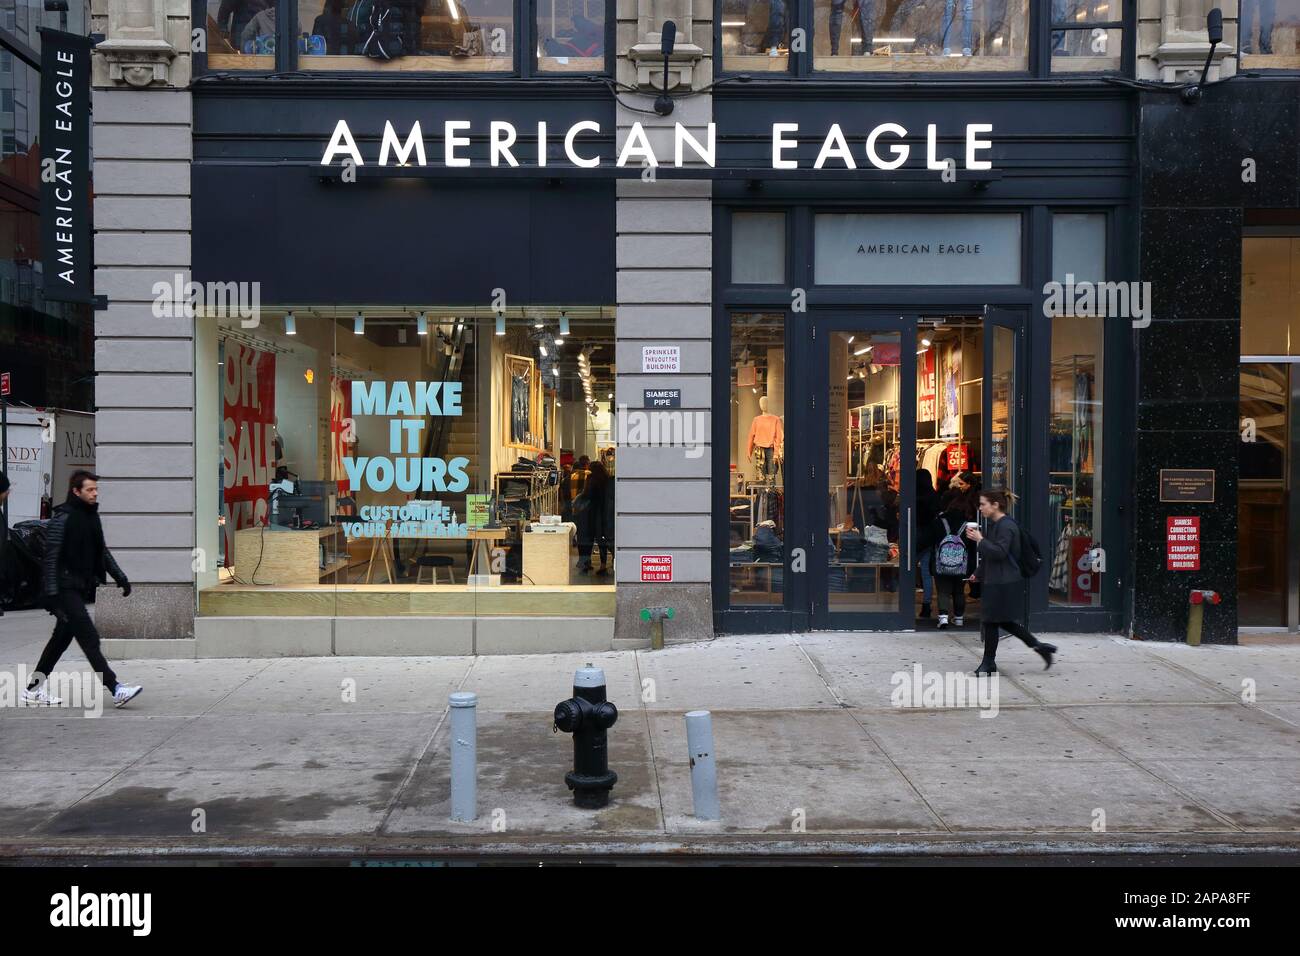 [historical storefront] American Eagle Studio, 19 Union Square West, New York, NY.  exterior storefront of a clothing store and custom jeans studio Stock Photo